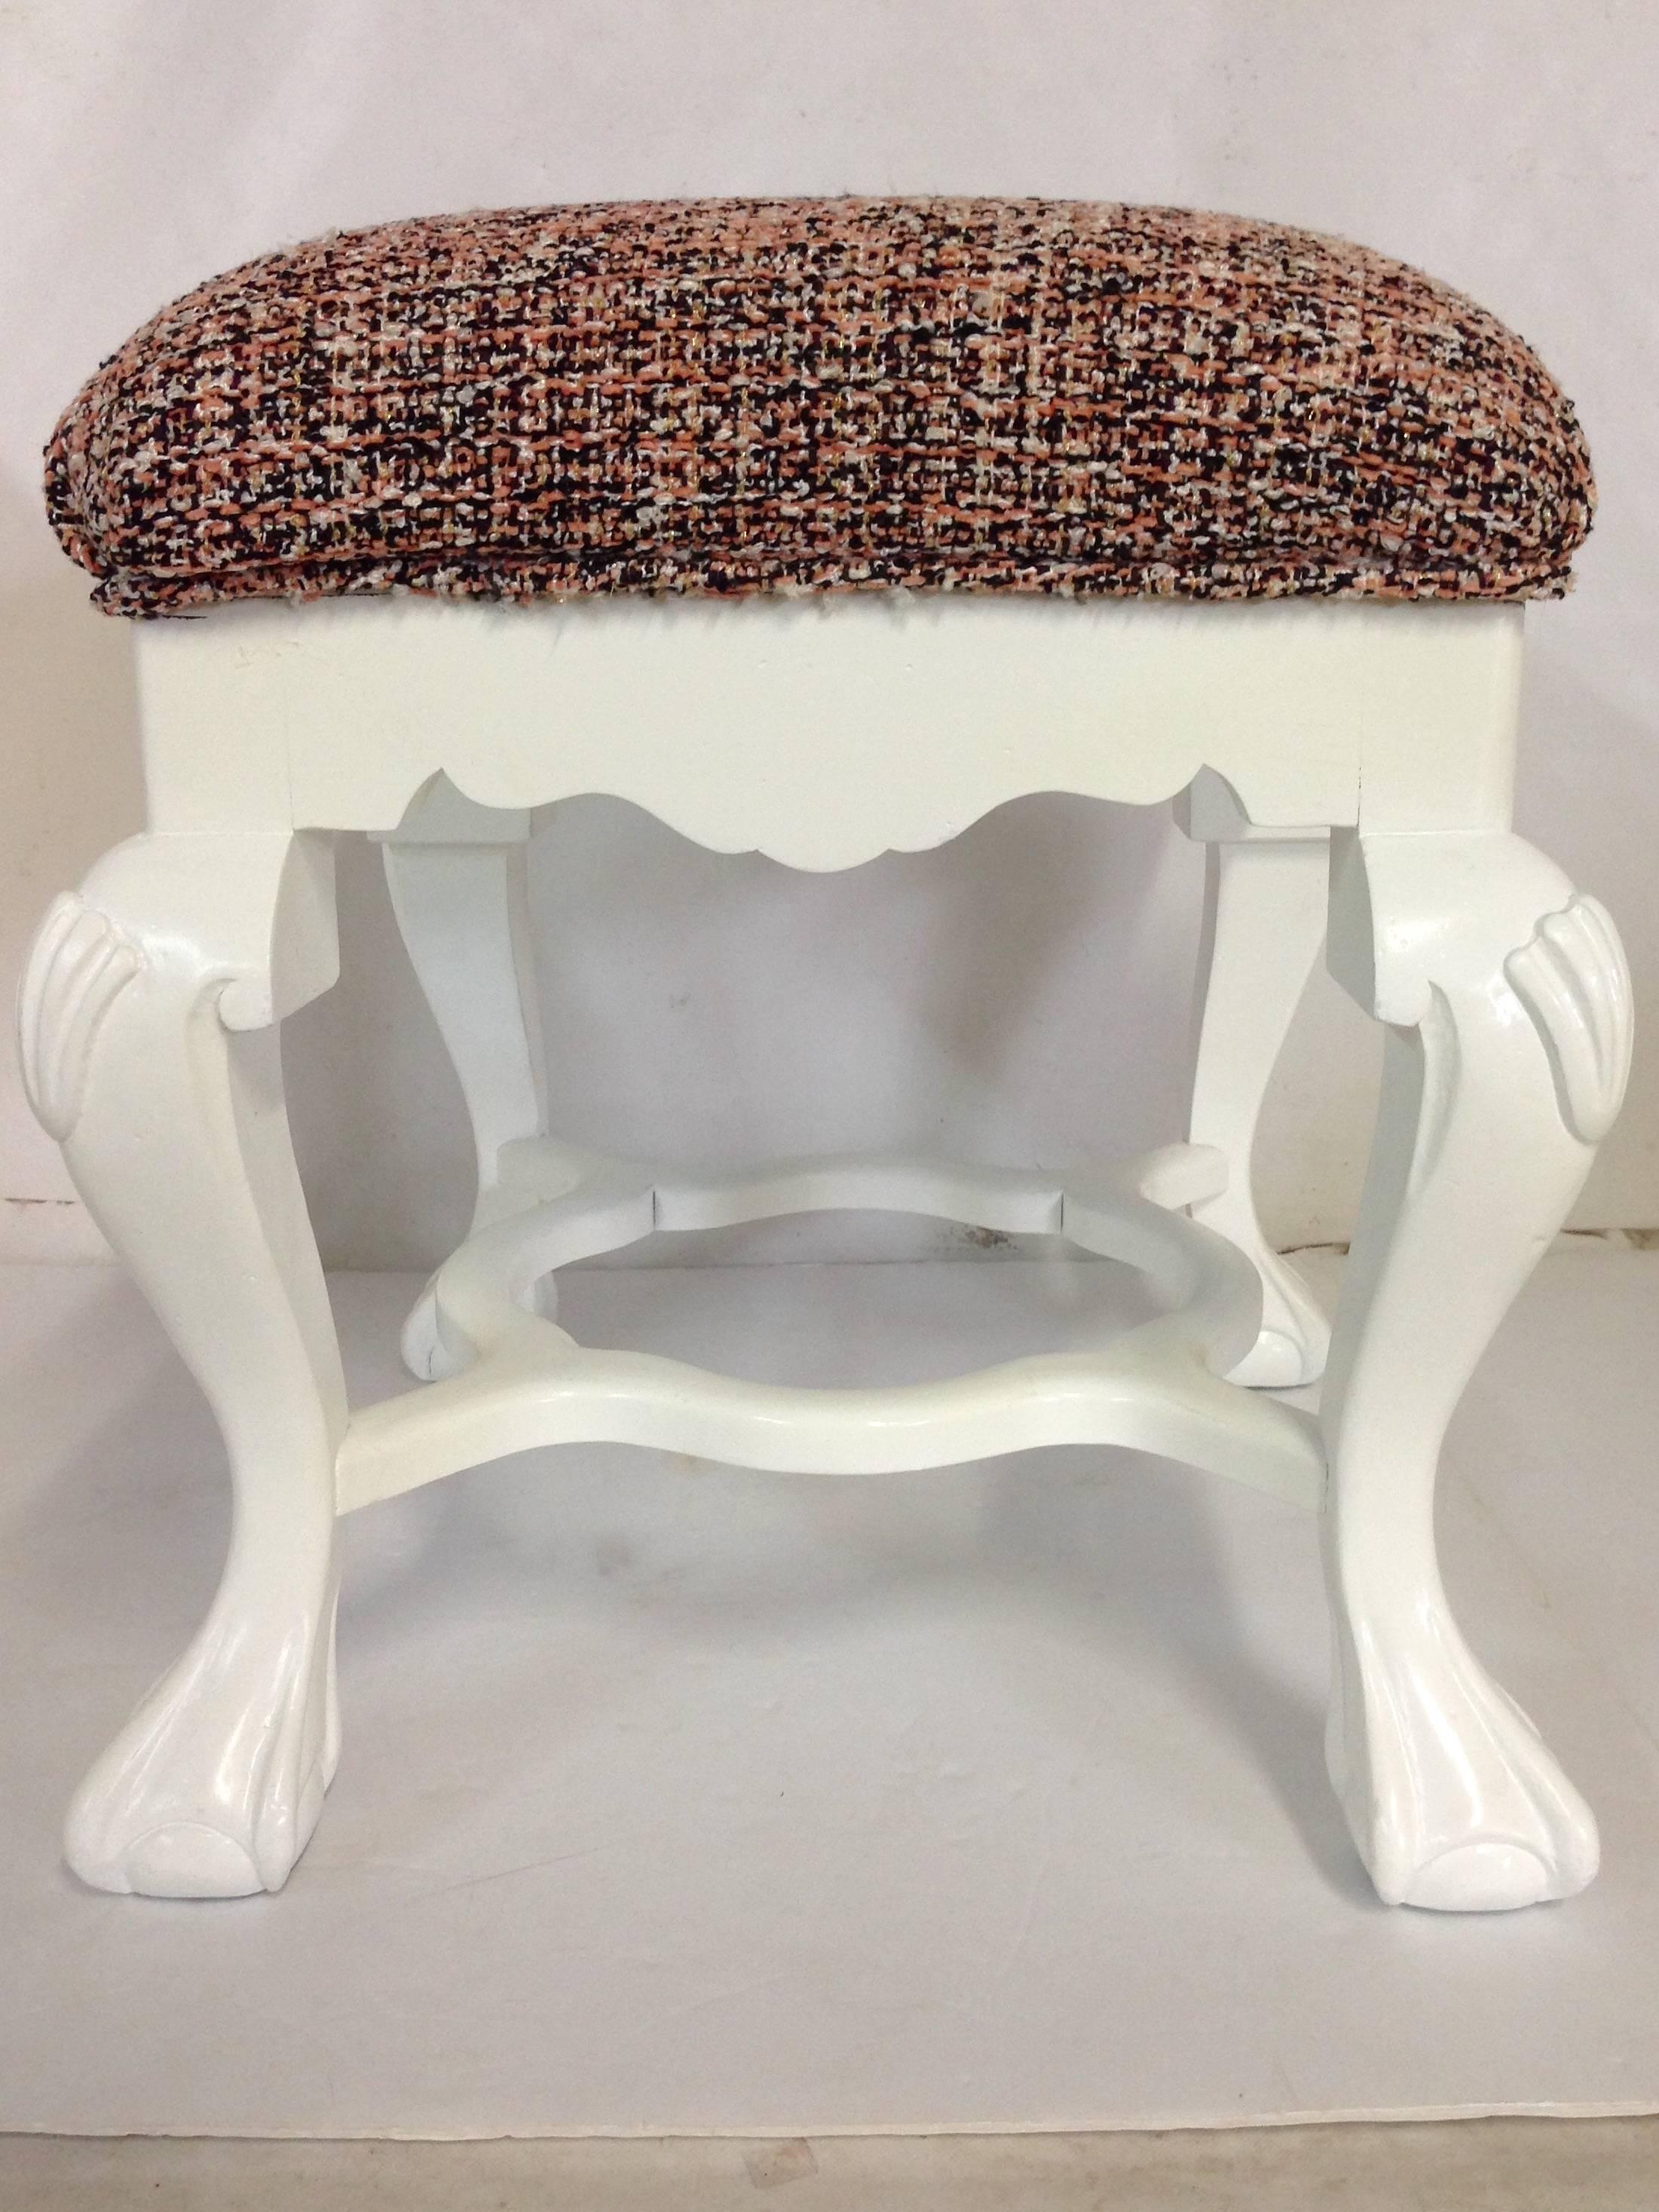 Large carved mahogany wood ottoman/bench, re-upholstered in Chanel - style
wool blend bouclé vintage fabric. Fabric is pink, black, white and has some metallic threading throughout. Fabric is in excellent vintage condition.